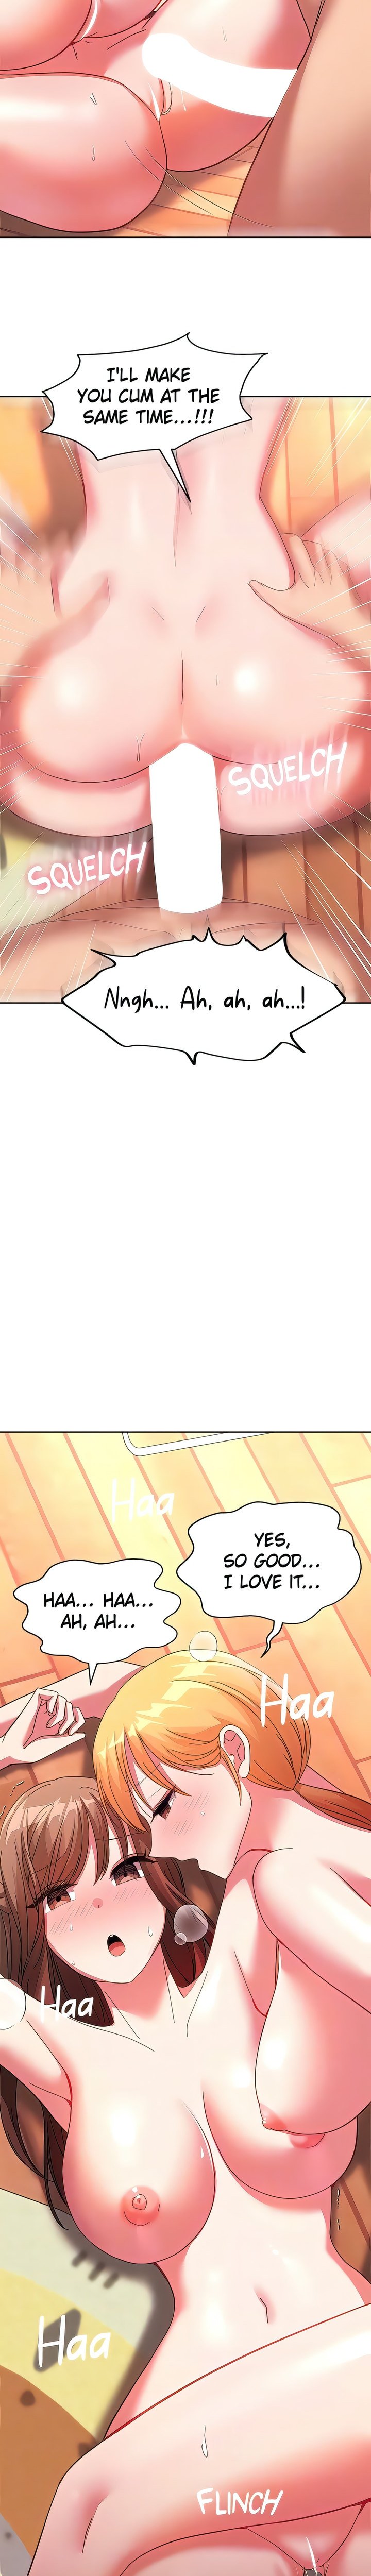 girls-i-used-to-teach-chap-33-16